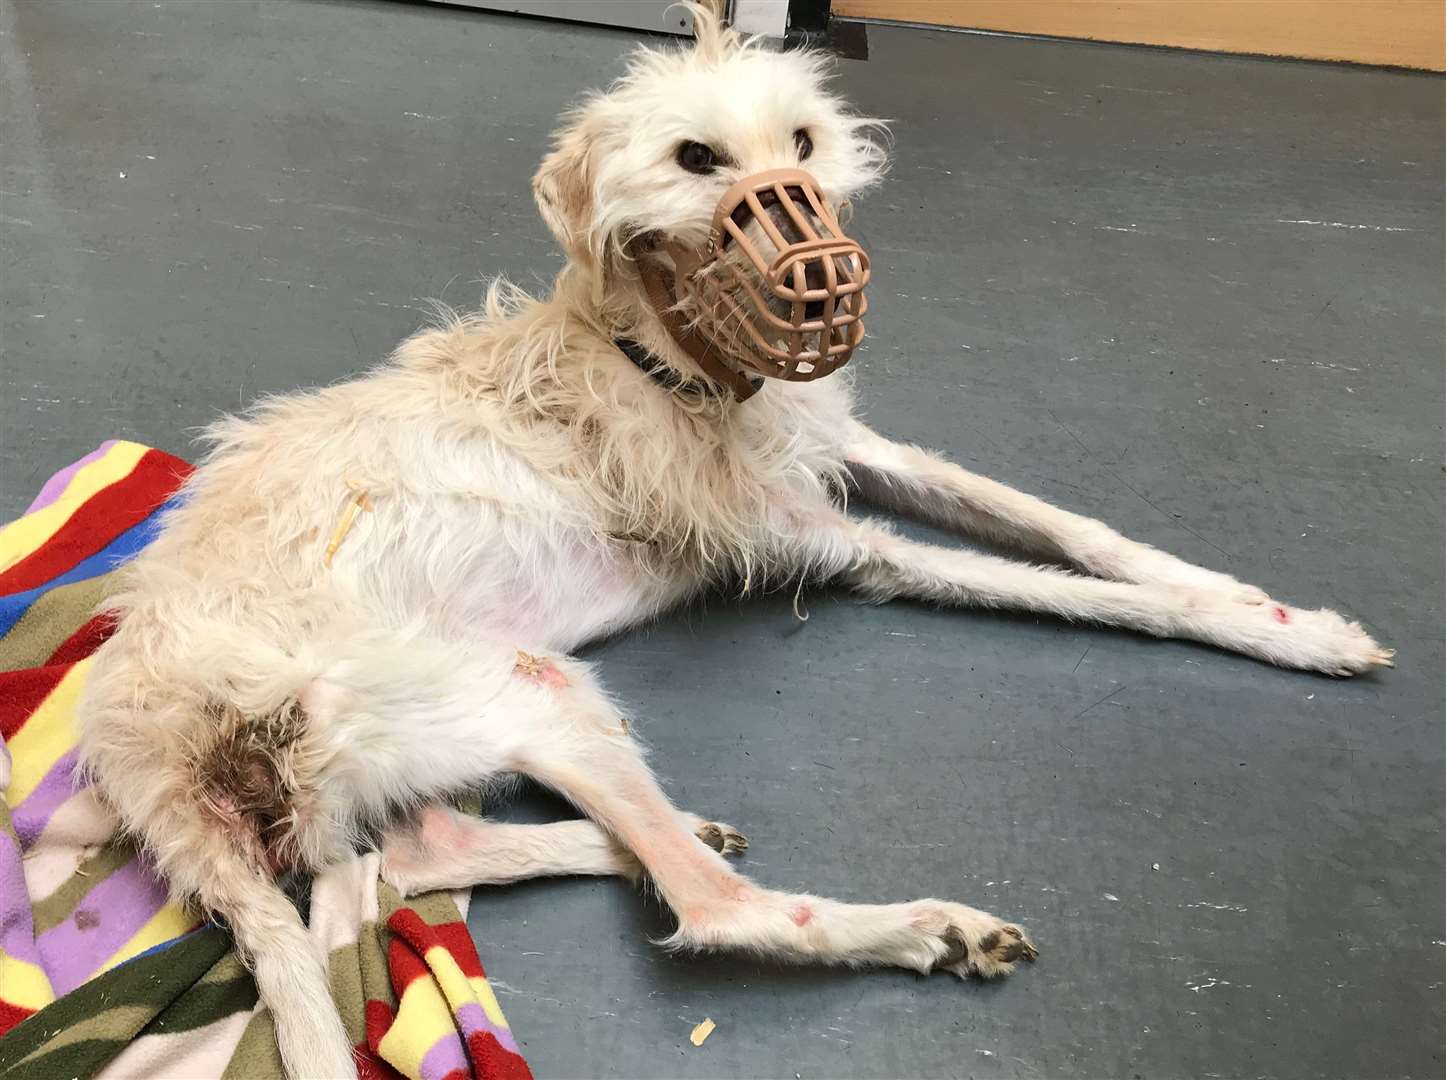 Blossom, a lurcher cross, was being eaten alive by maggots and just hours away from death when she was rescued. Picture: RSPCA